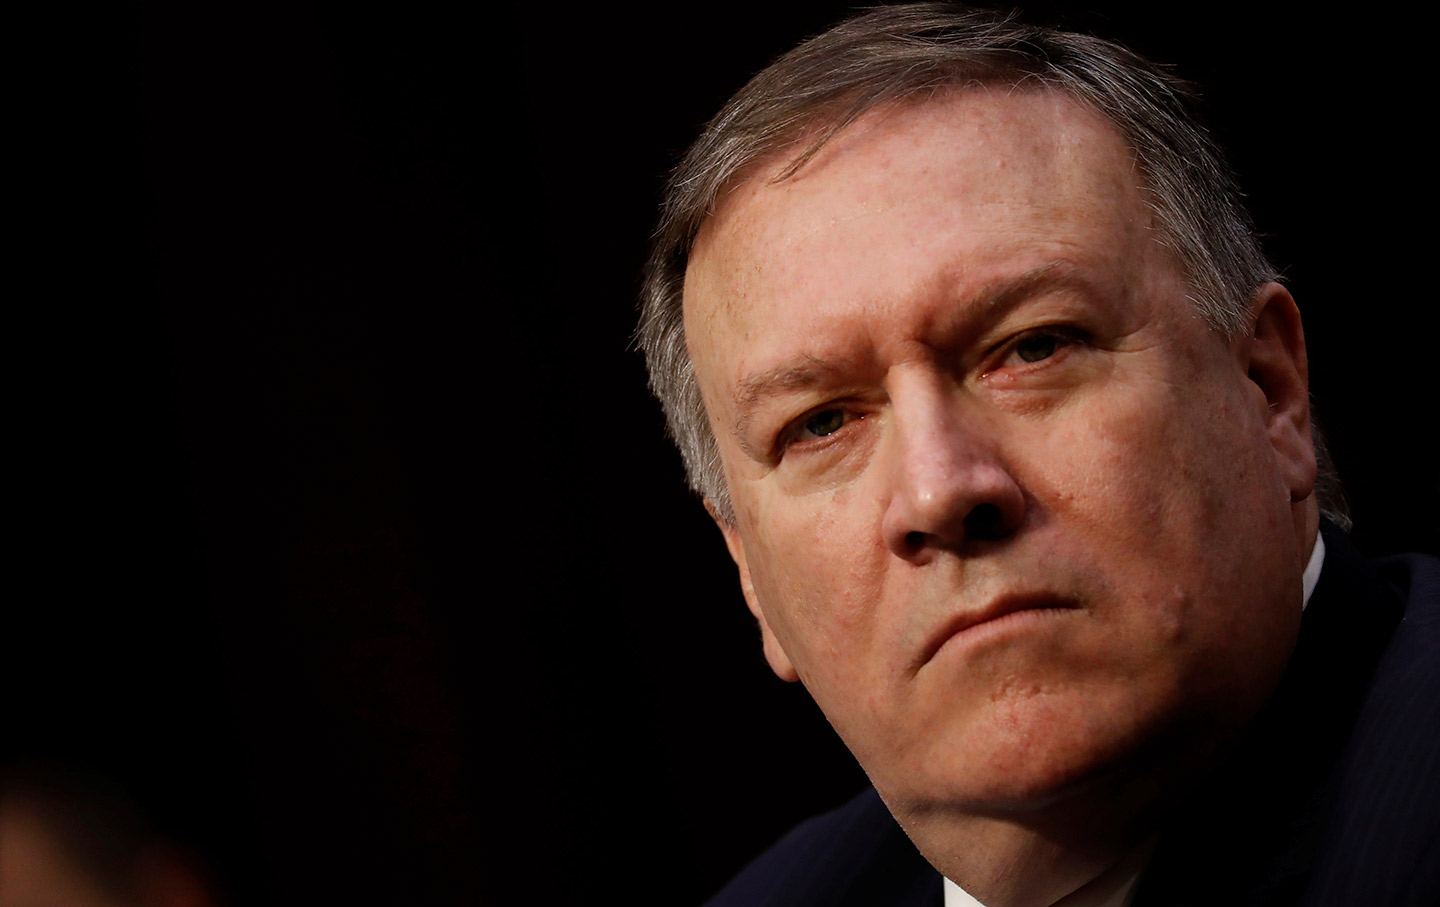 Don’t Let Mike Pompeo Become Secretary of State